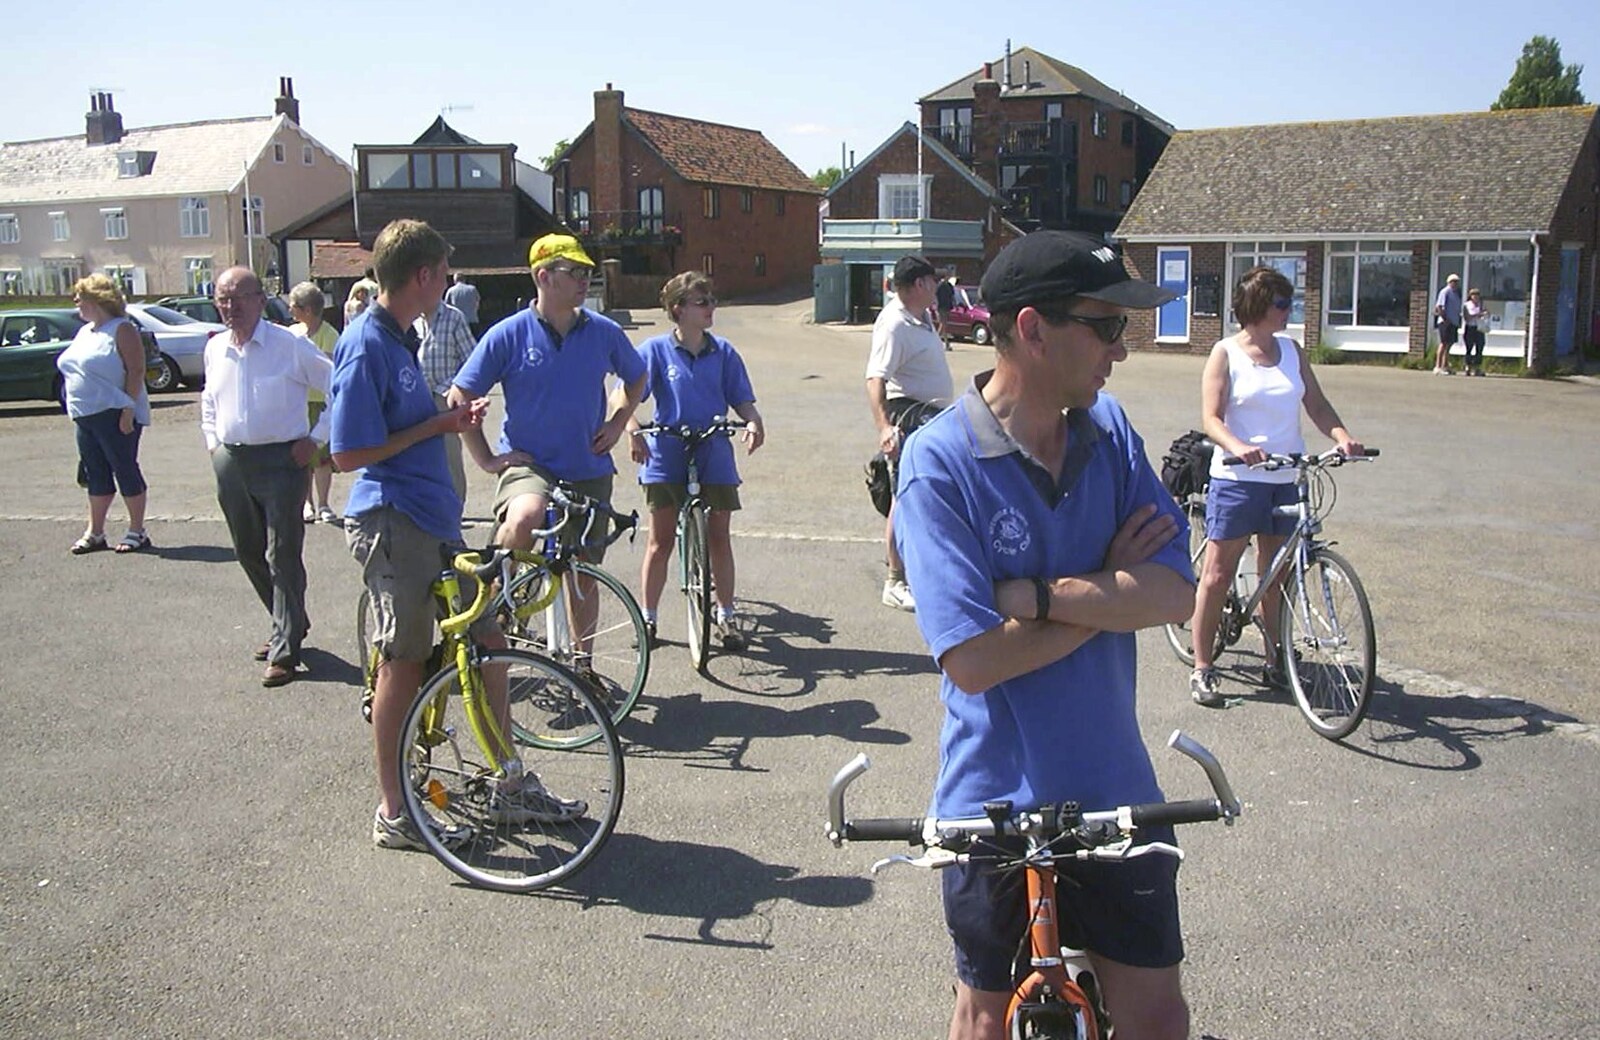 The BSCC Annual Bike Ride, Orford, Suffolk - 12th July 2003: The bike massive hang out on the quay